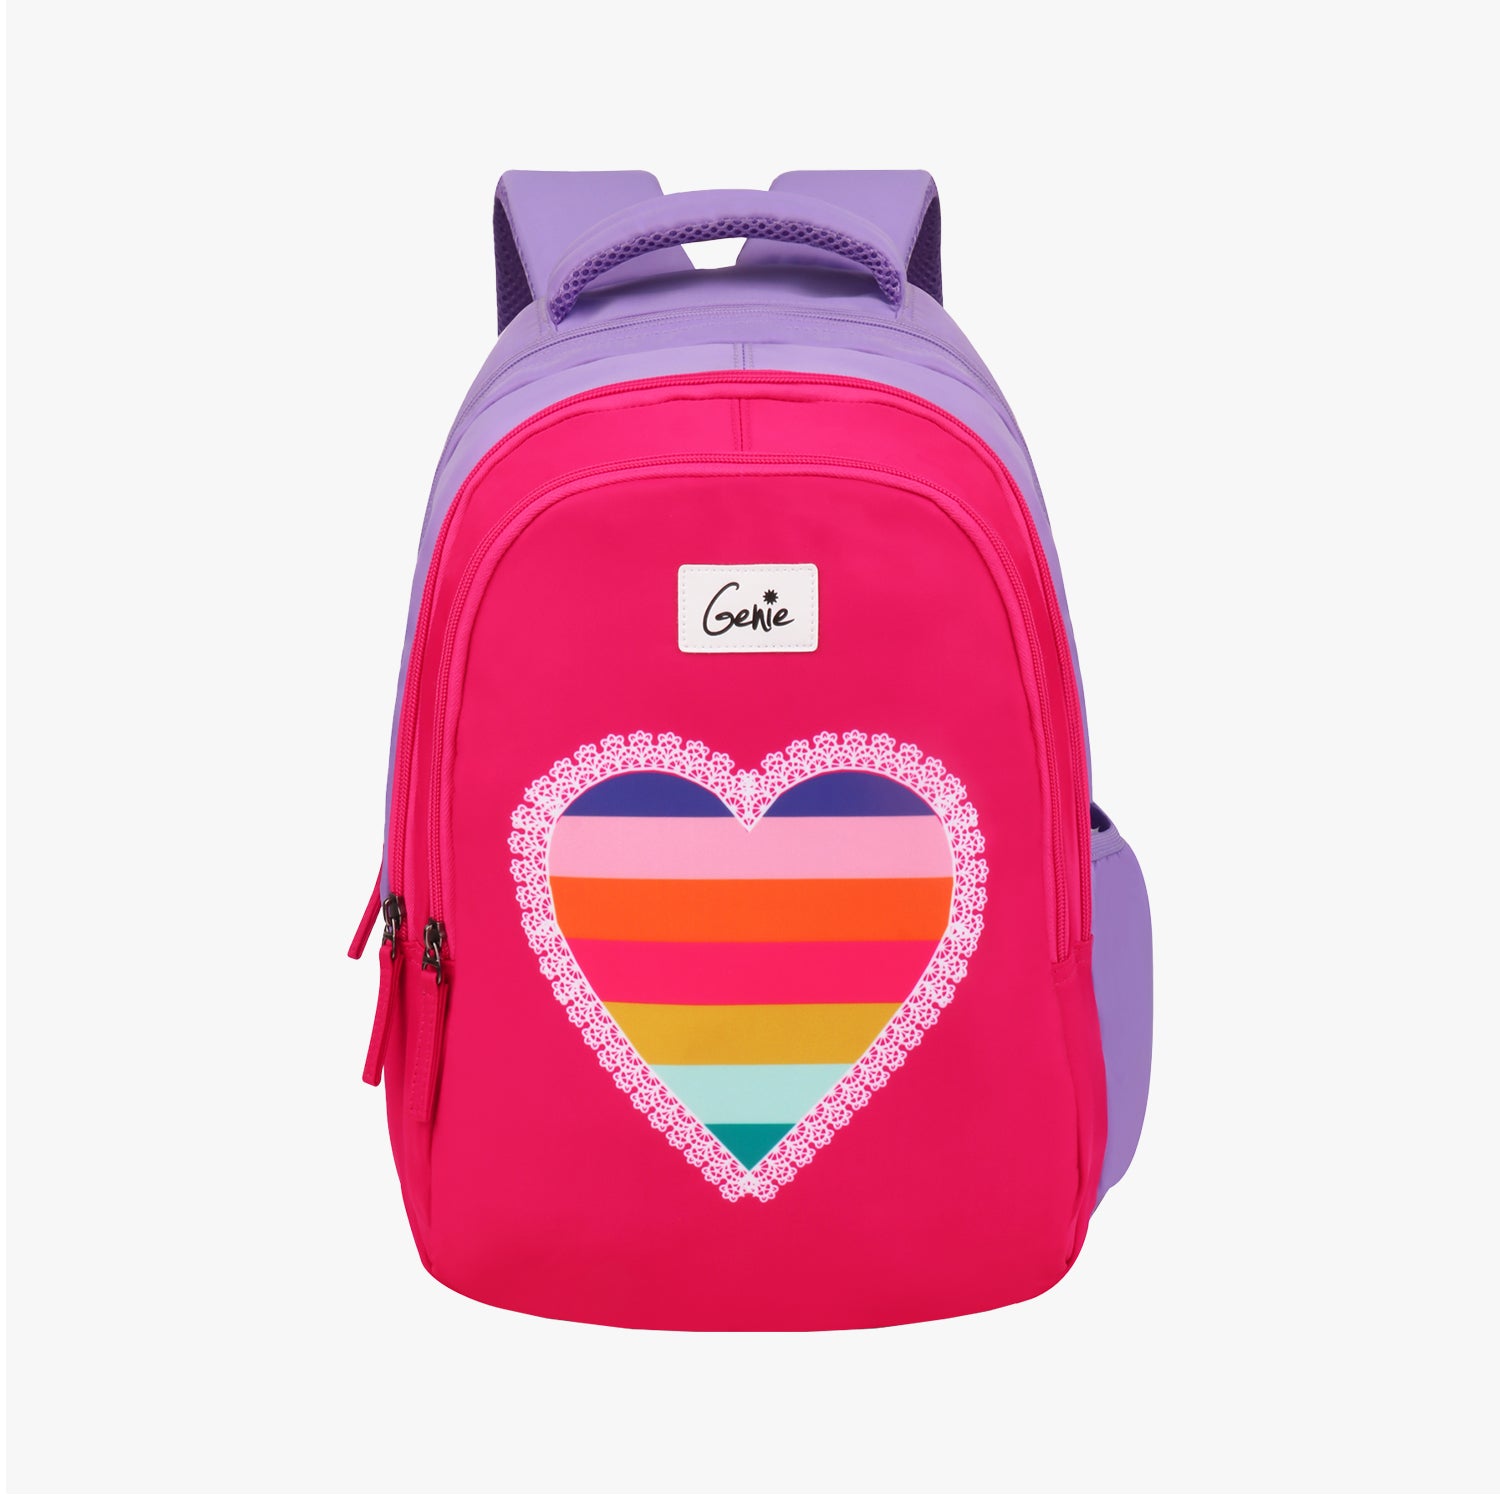 Heartbeat Junior Backpack - Pink